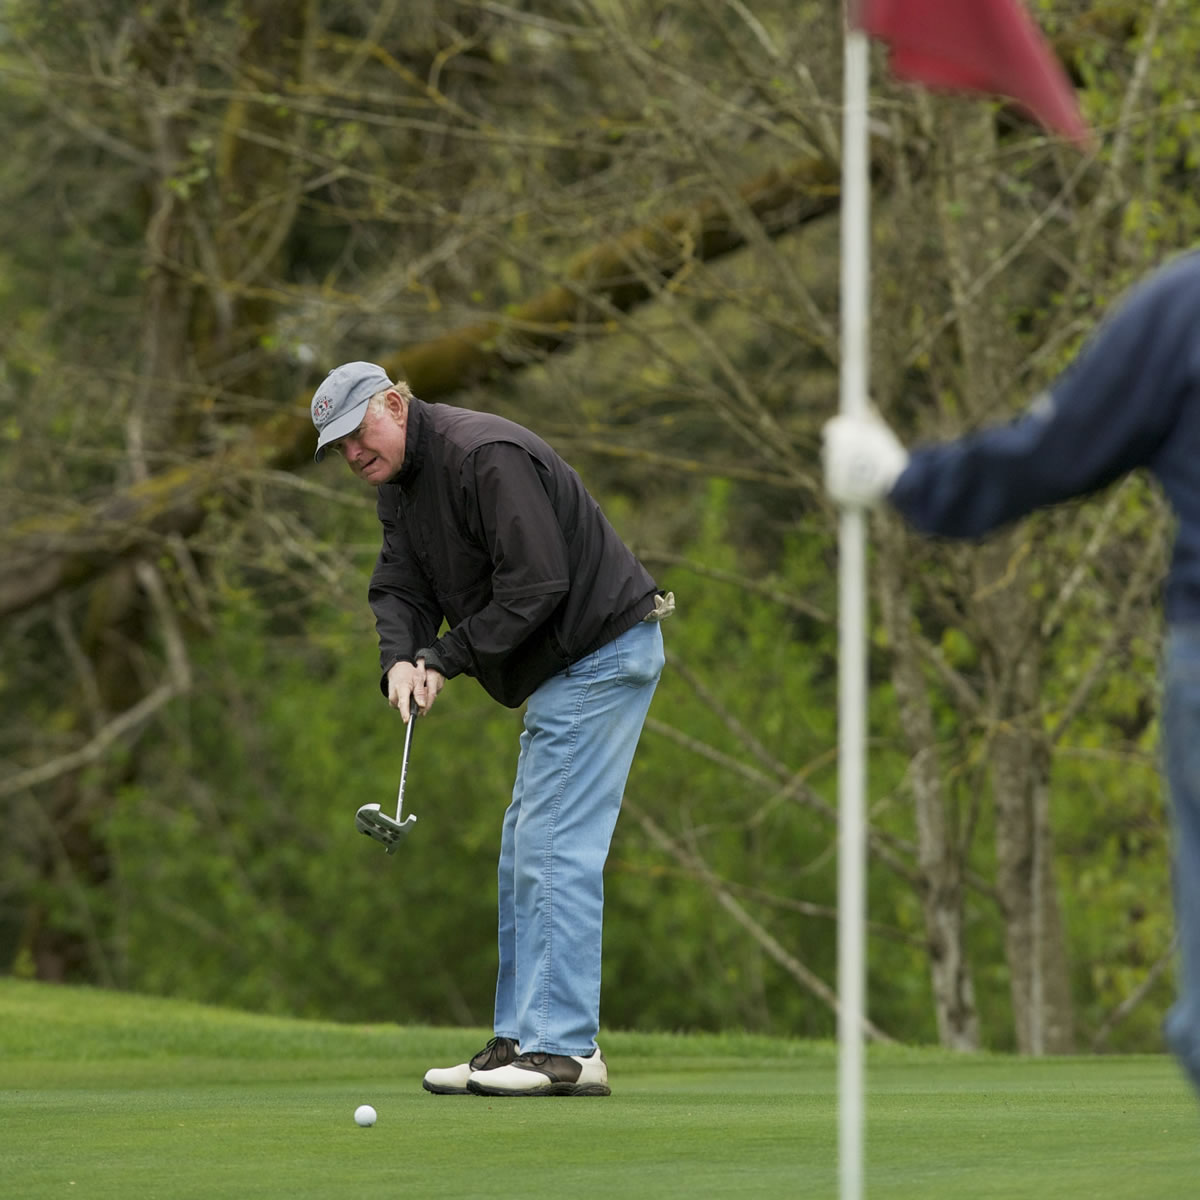 J.J Smith putts during a round of golf at Green Mountain Golf Course on April 12.